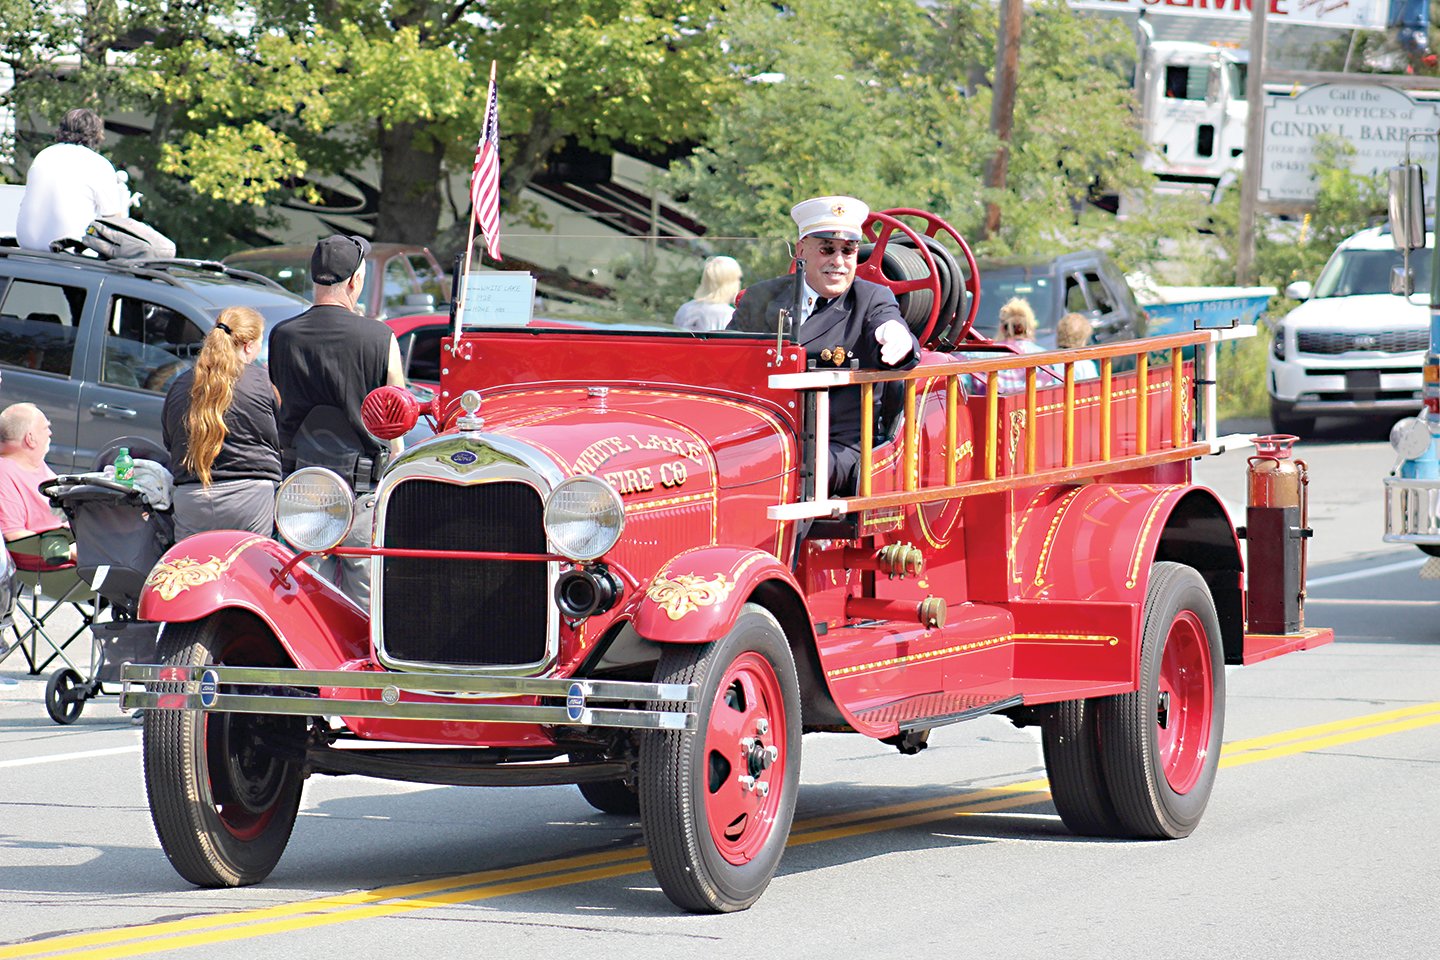 Ira “Moose” Liff was behind the wheel of the White Lake Fire Company’s 1922 truck.